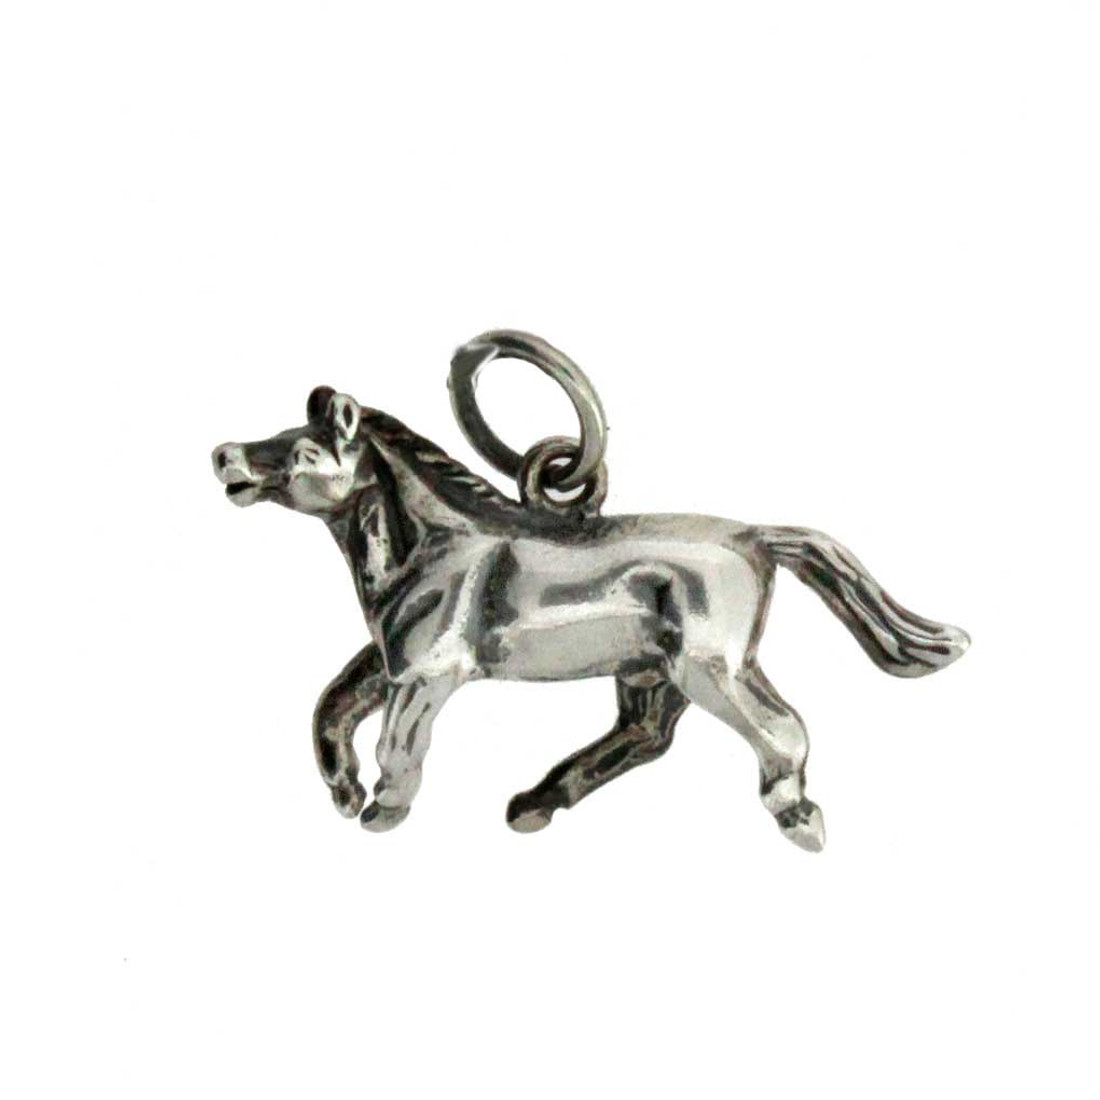 Horse sterling silver charm or pendant.